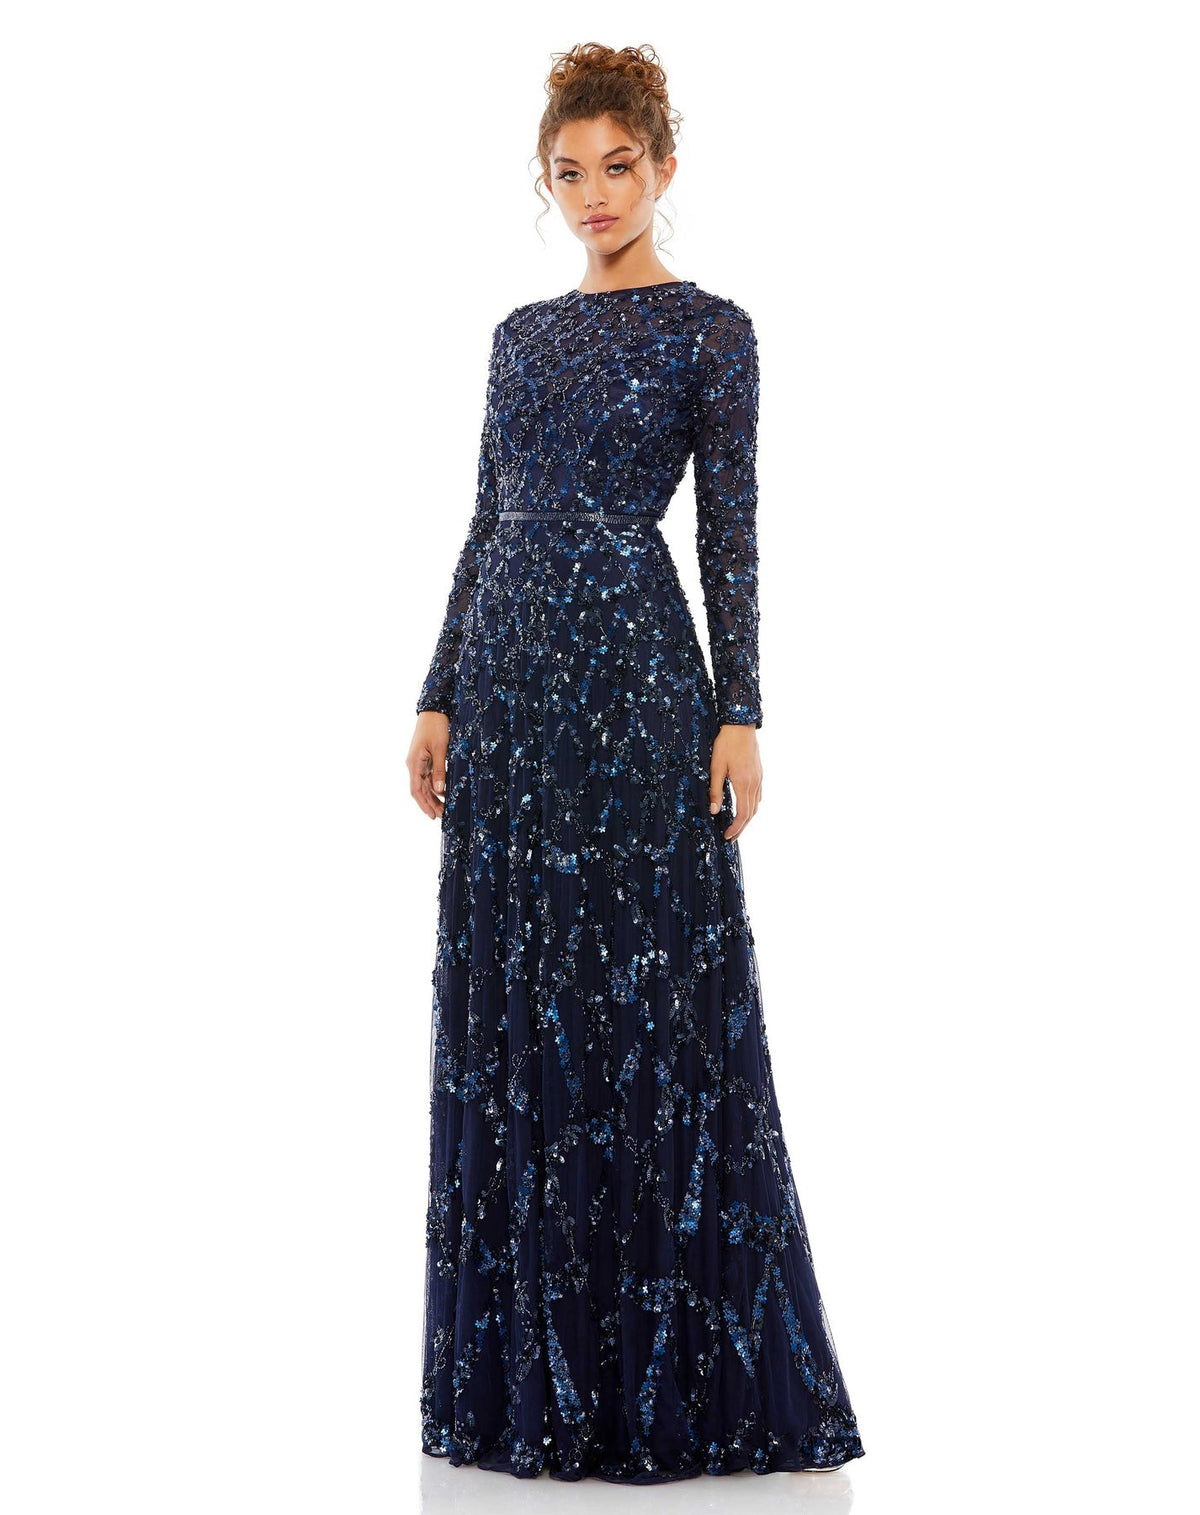 Mac Duggal Style #5496 Embellished illusion high neck long sleeve A-line gown - midnight  navy blue